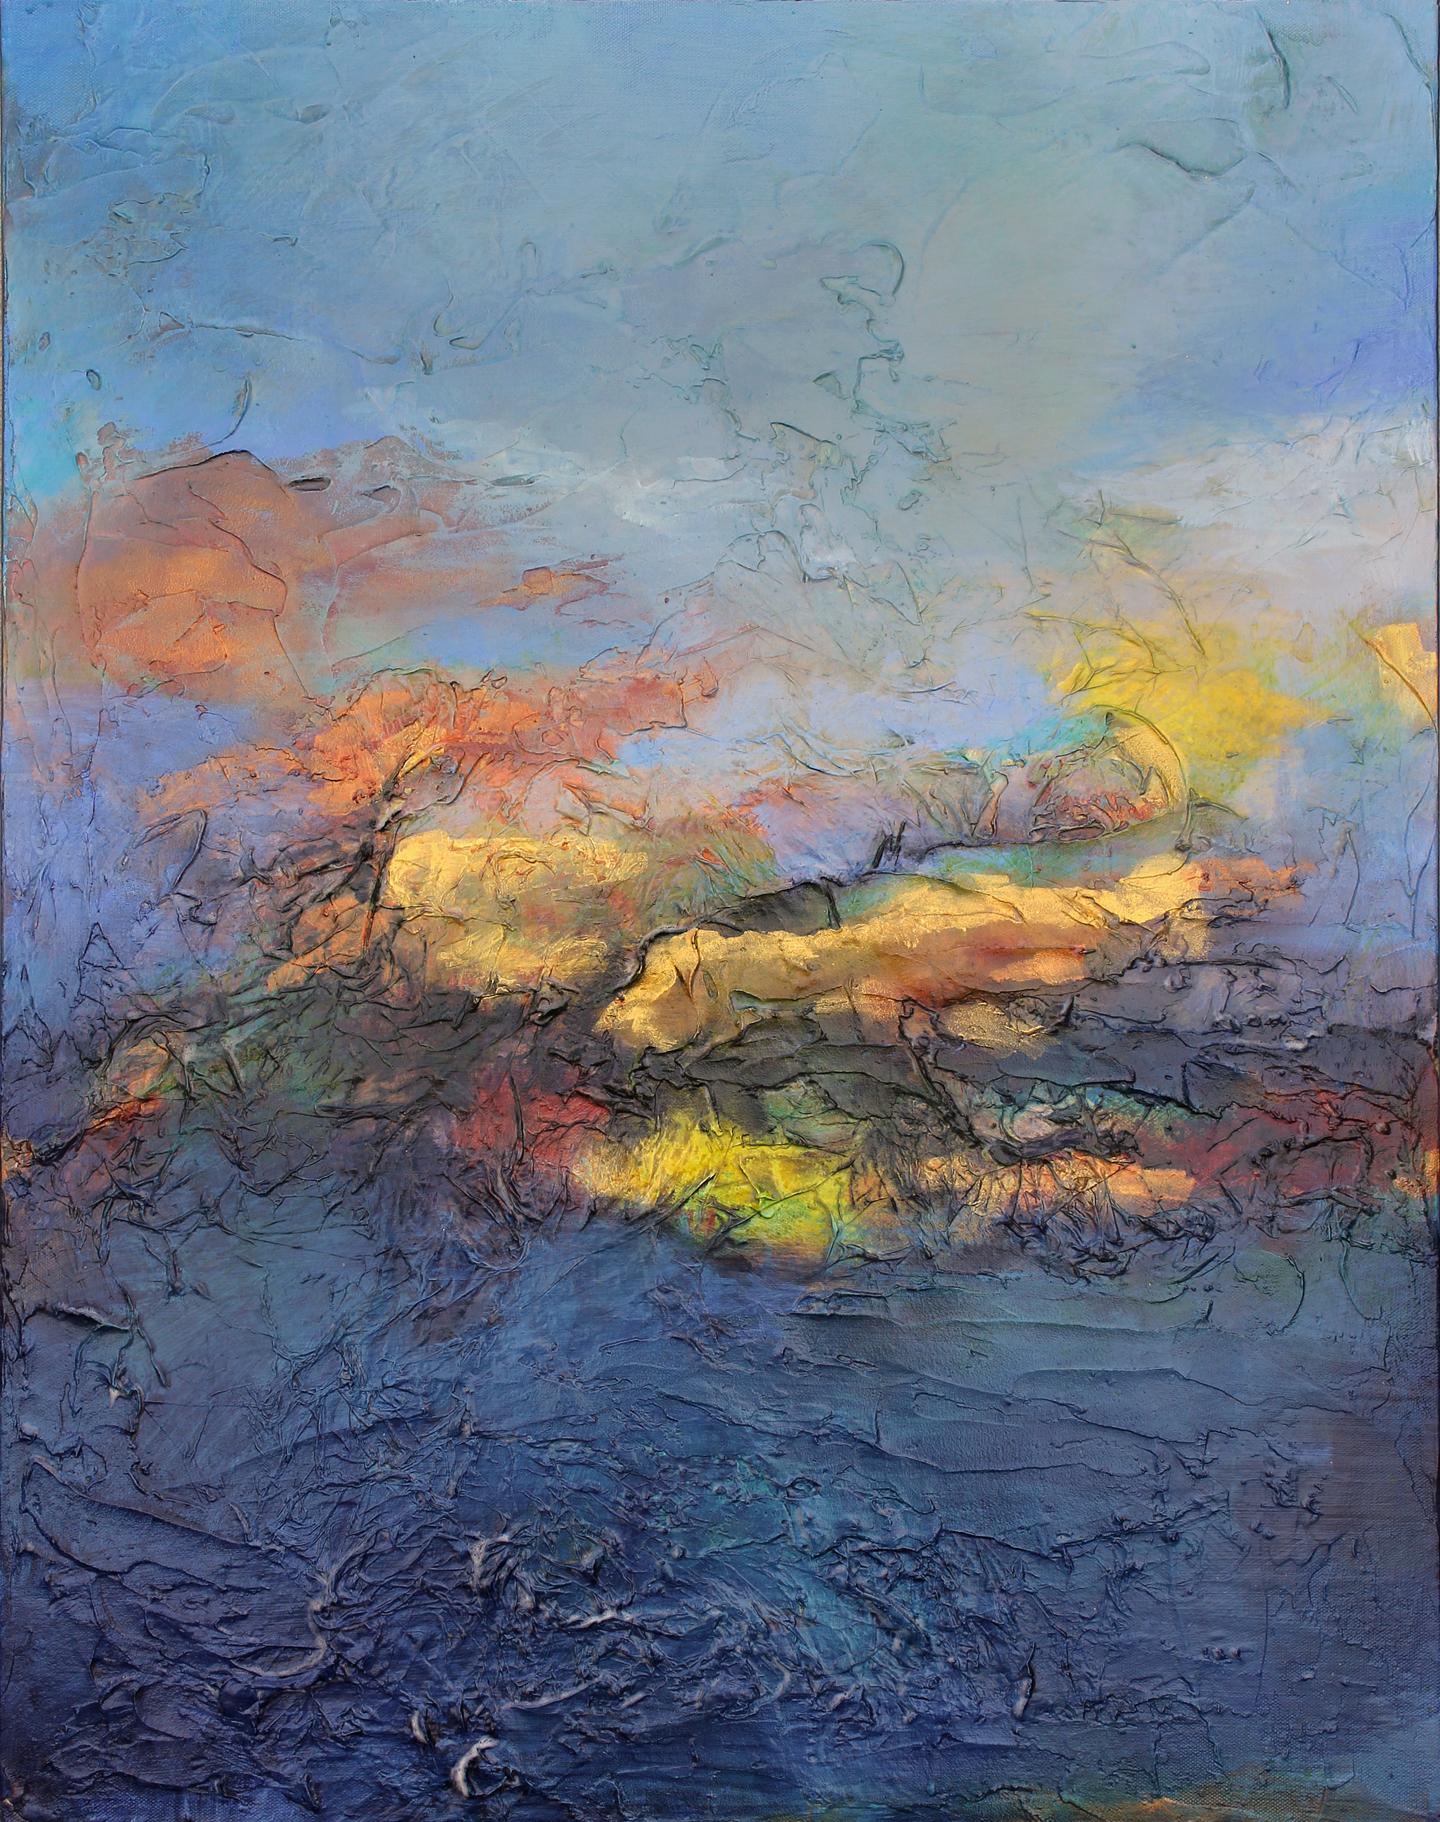 A Drift in the Clouds, Abstract Painting - Mixed Media Art by Charles Kacin